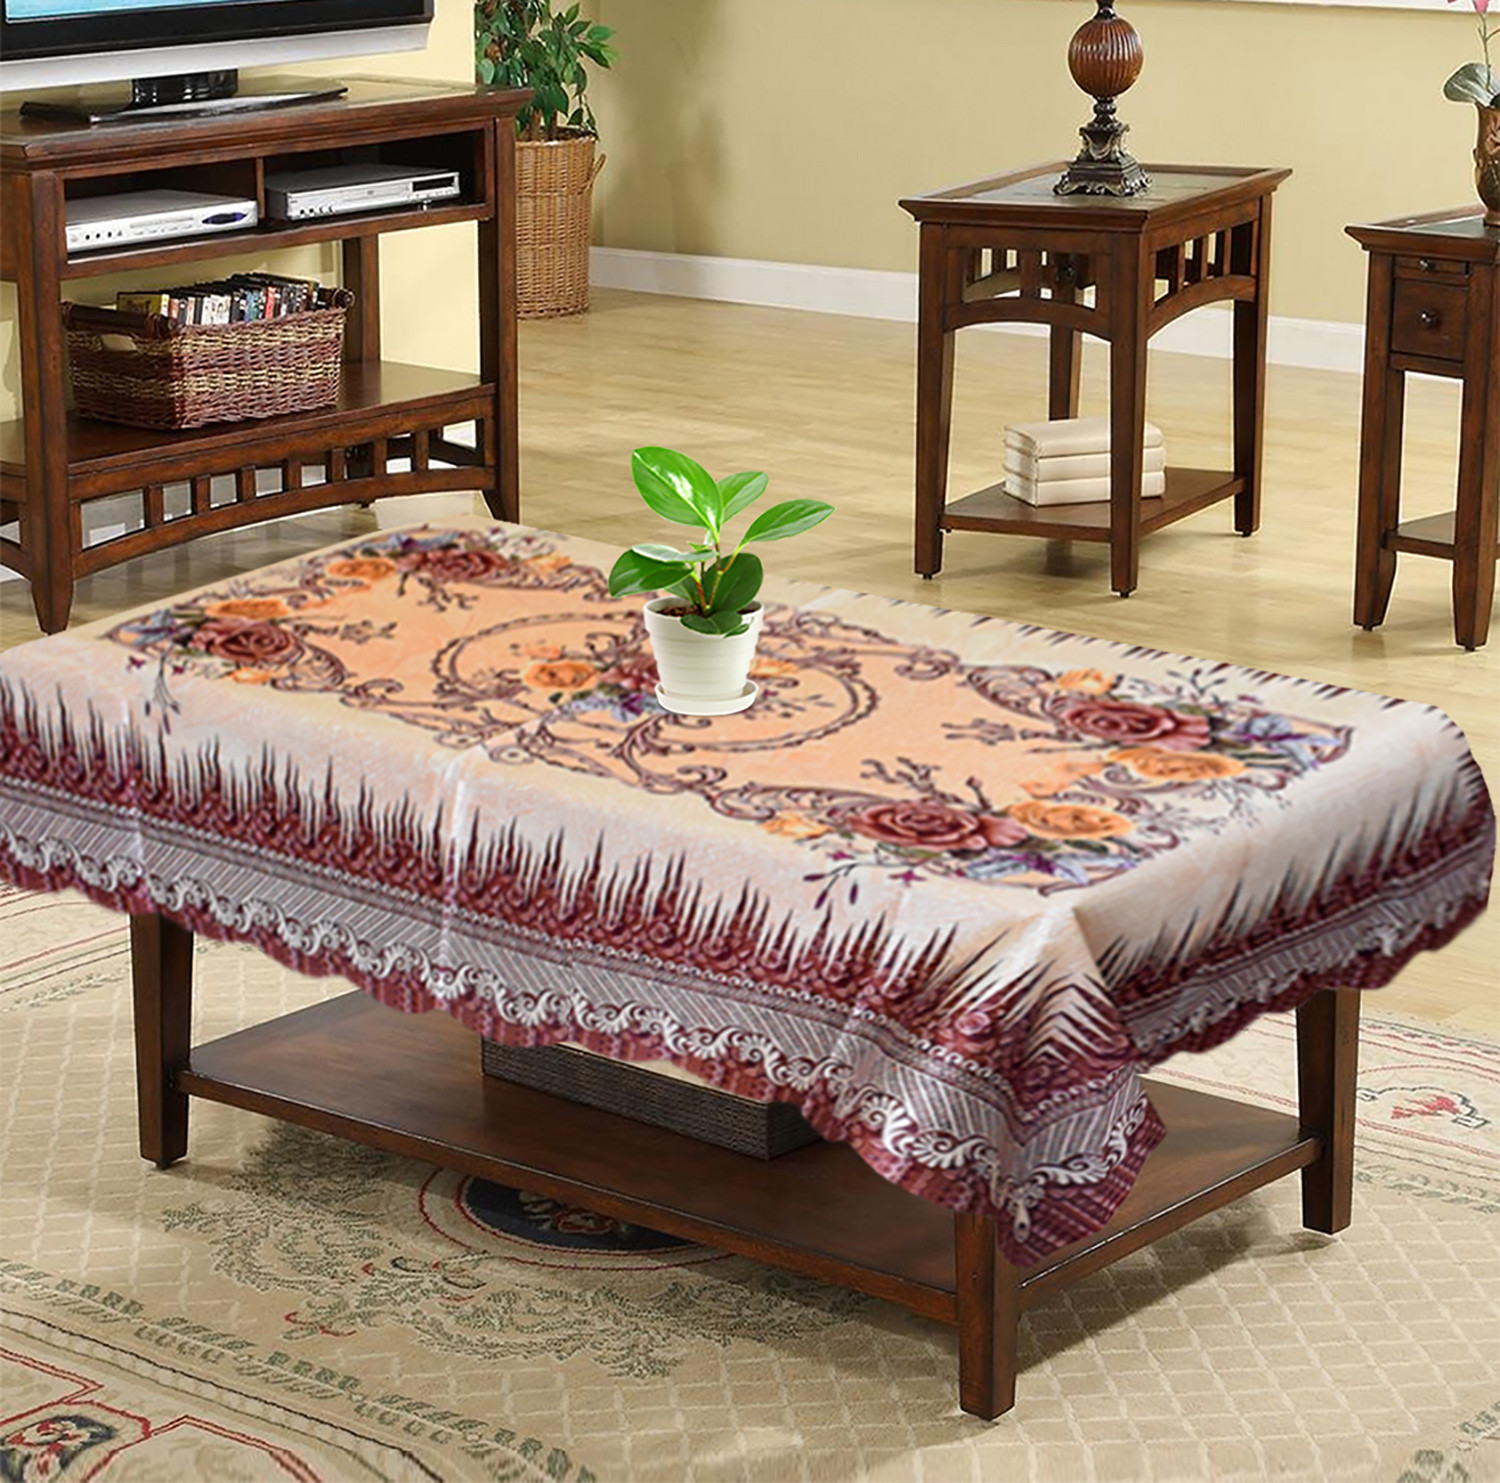 Kuber Industries Leaf Printed Soft Cotton 4 Seater Center Table Cover- 40